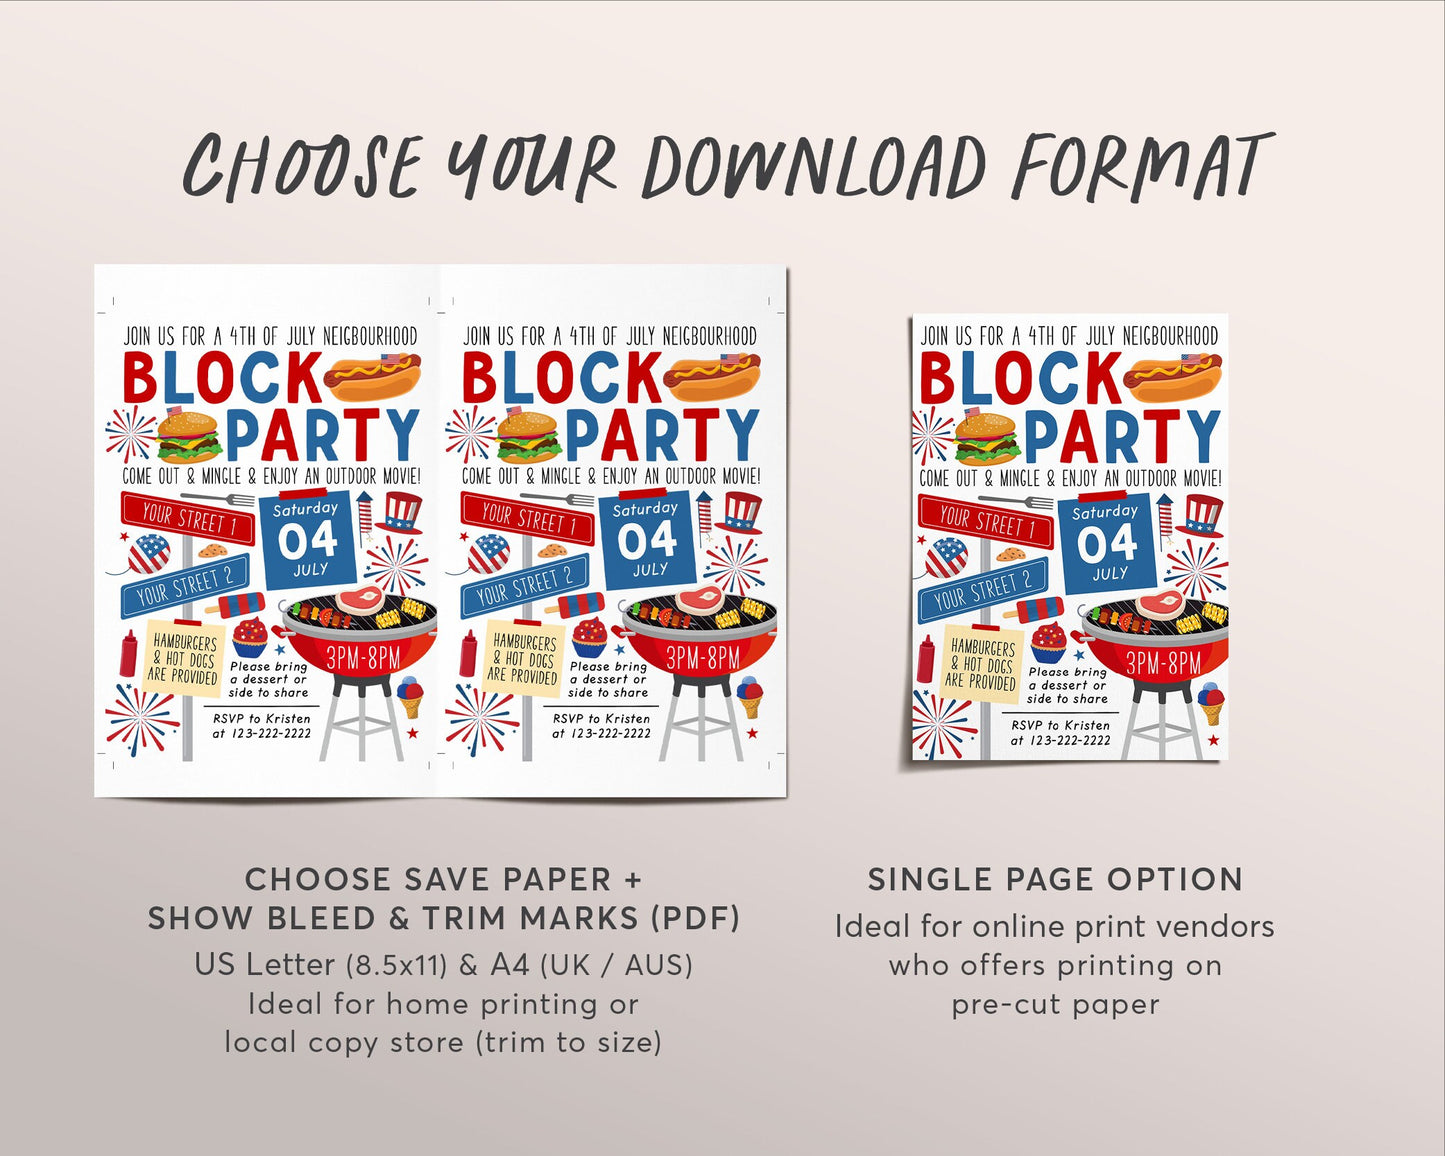 4th of July Block Party Invitation Editable Template, Independence Day Fourth of July Open House Invite, BBQ Barbecue Picnic Summer Party